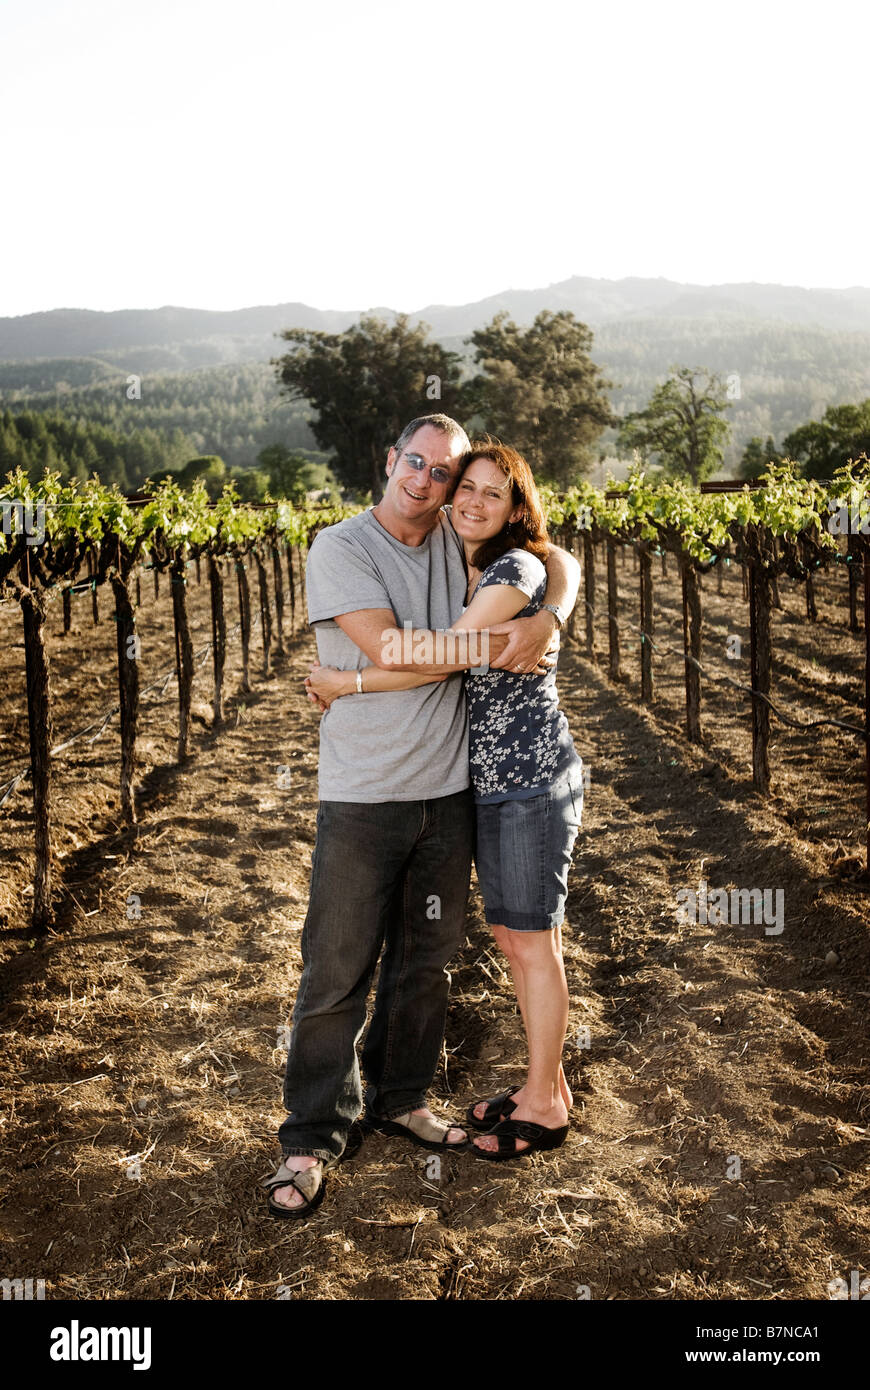 Couple hugging in California vineyard Banque D'Images